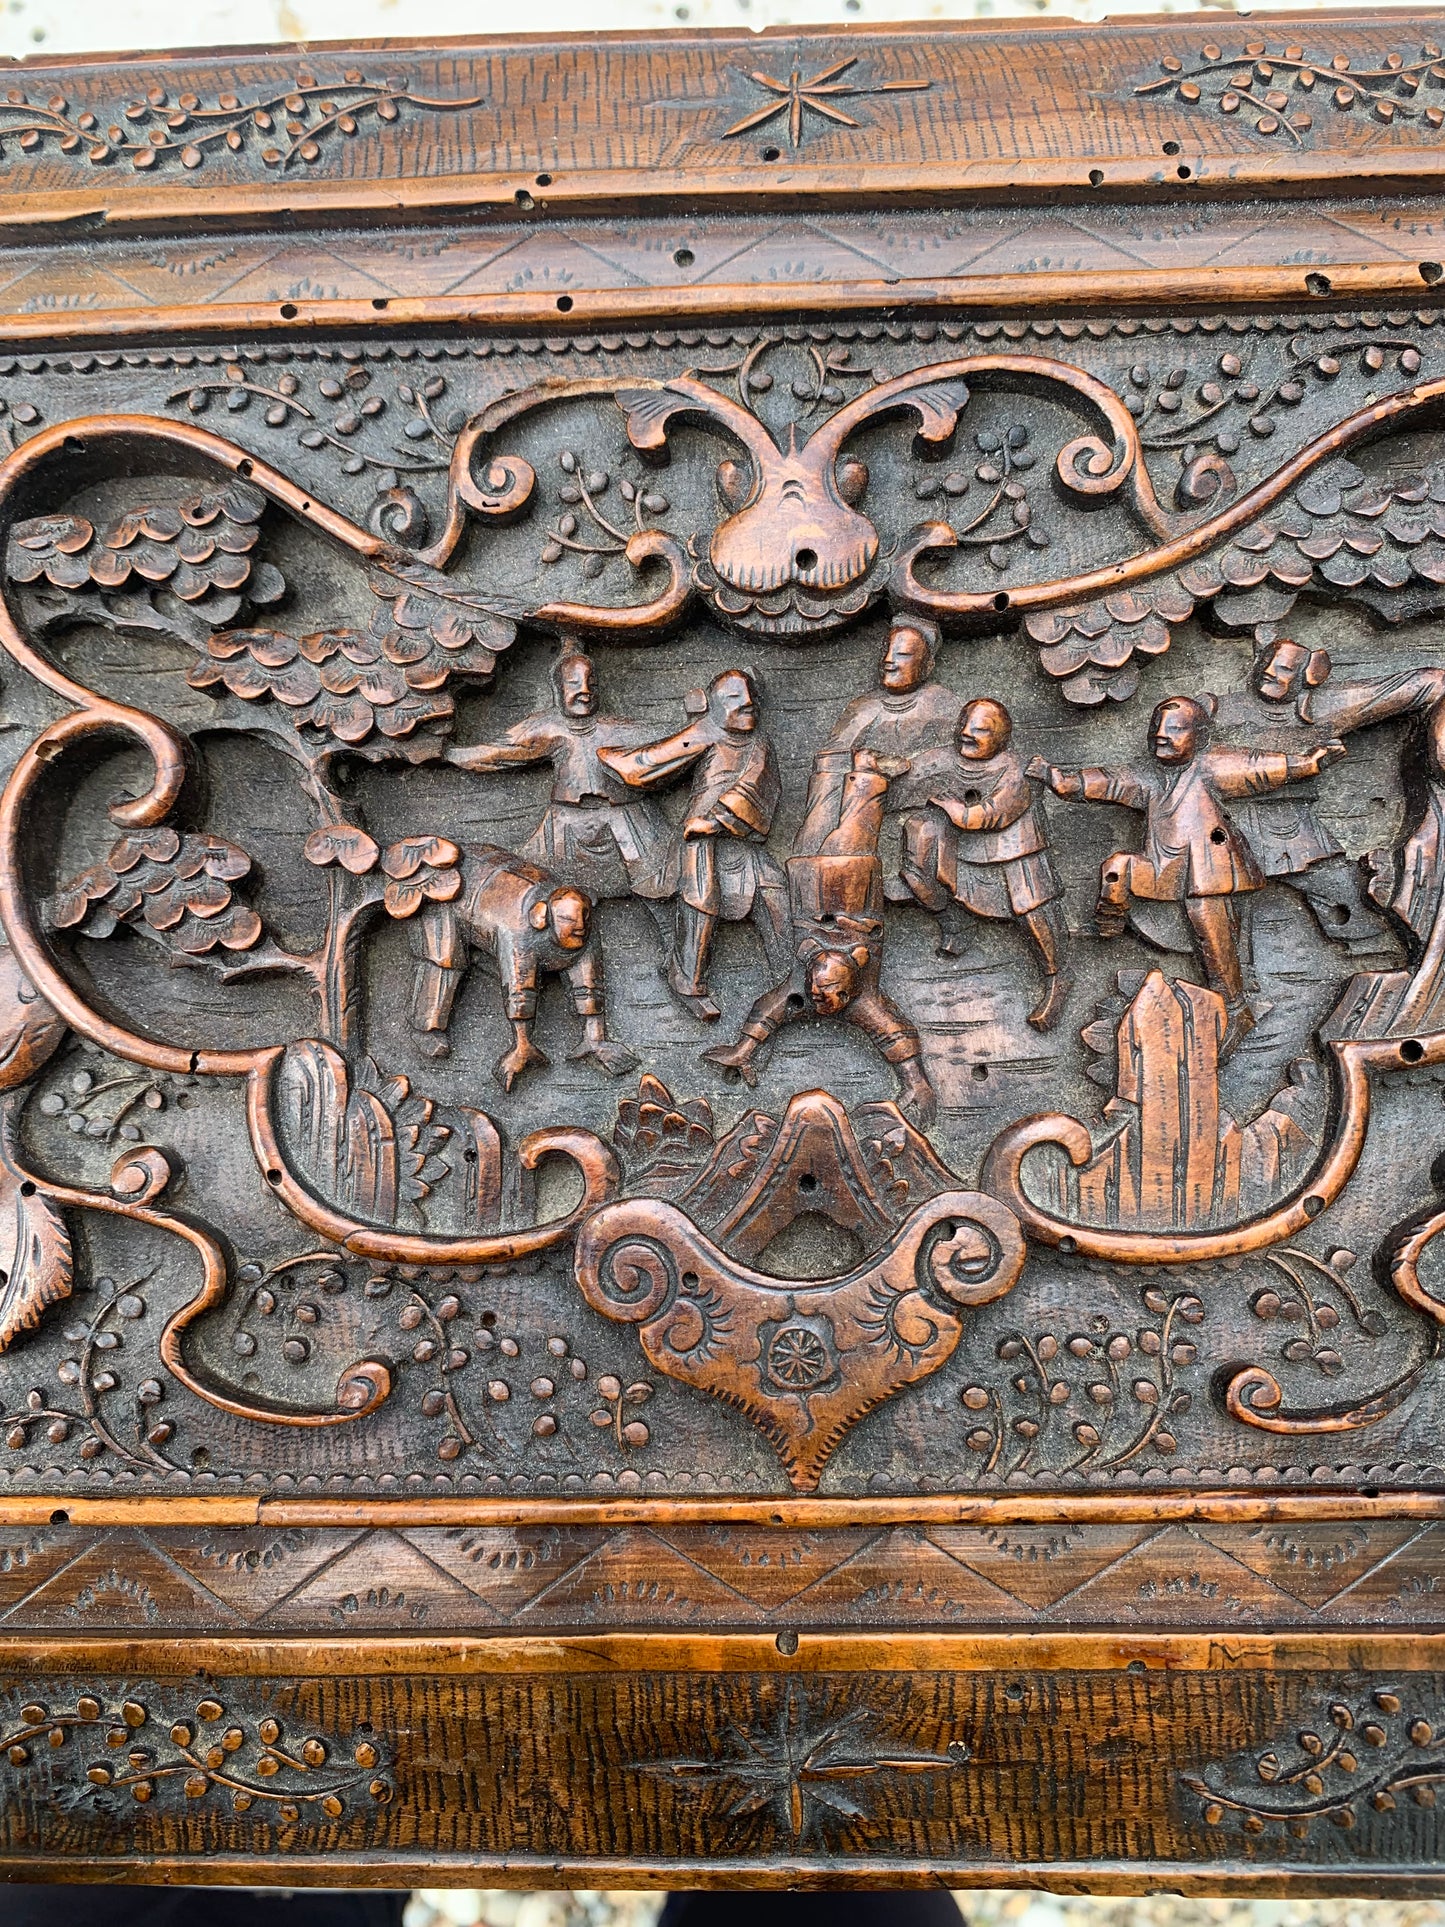 Chinese wooden casket carved with fruit, pumpkins and oriental characters.  19th century.